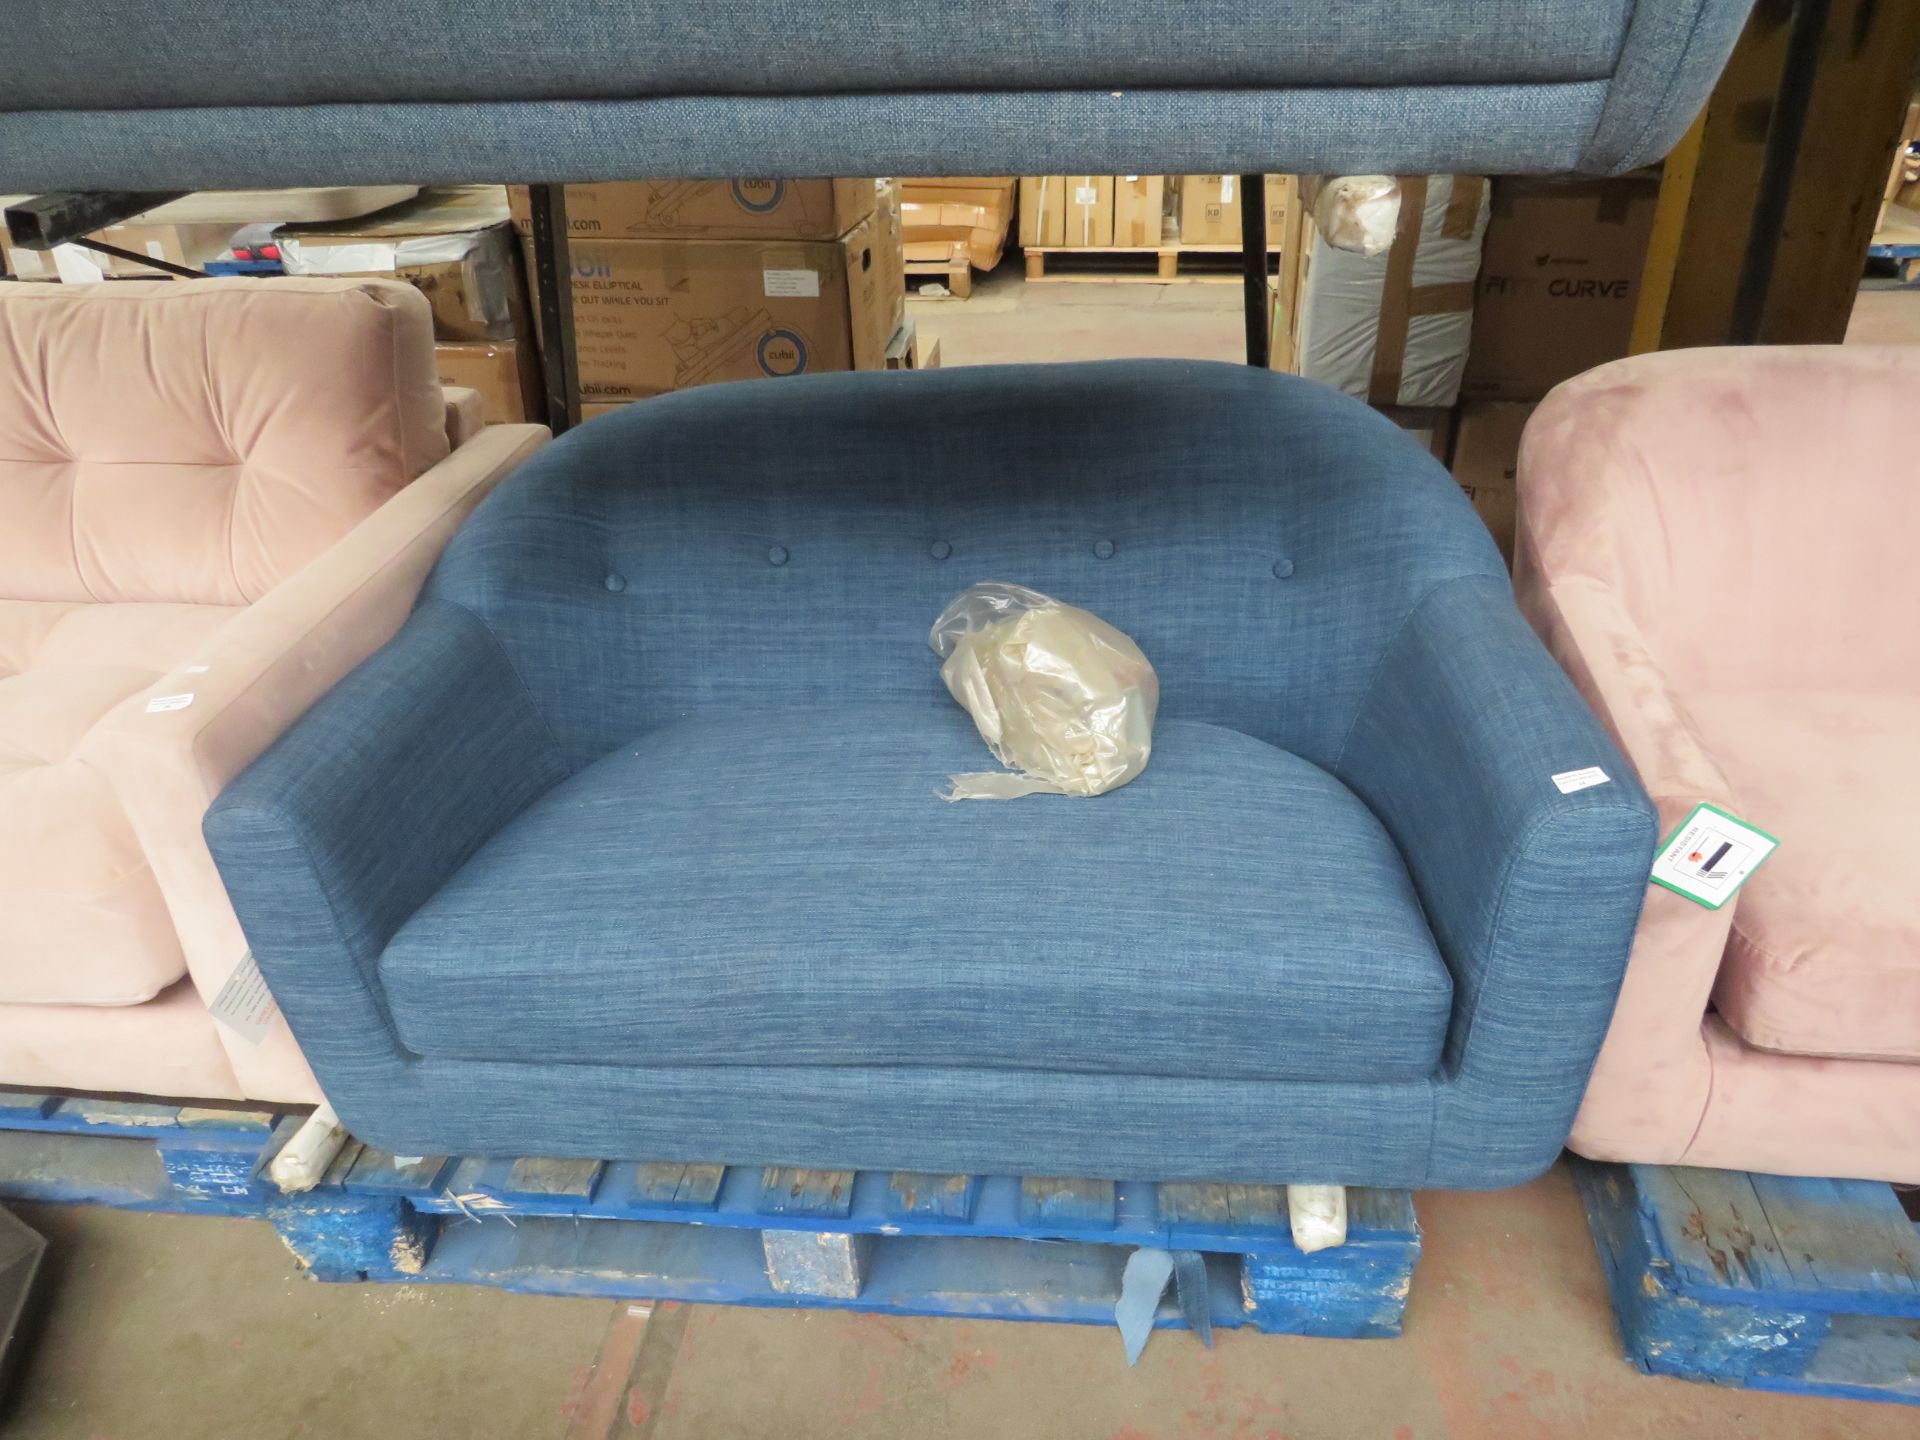 | 1X | MADE.COM BLUE TUBBY LOVE SEAT | no major damage (PLEASE NOTE, THIS DOES NOT PROVIDE ANY